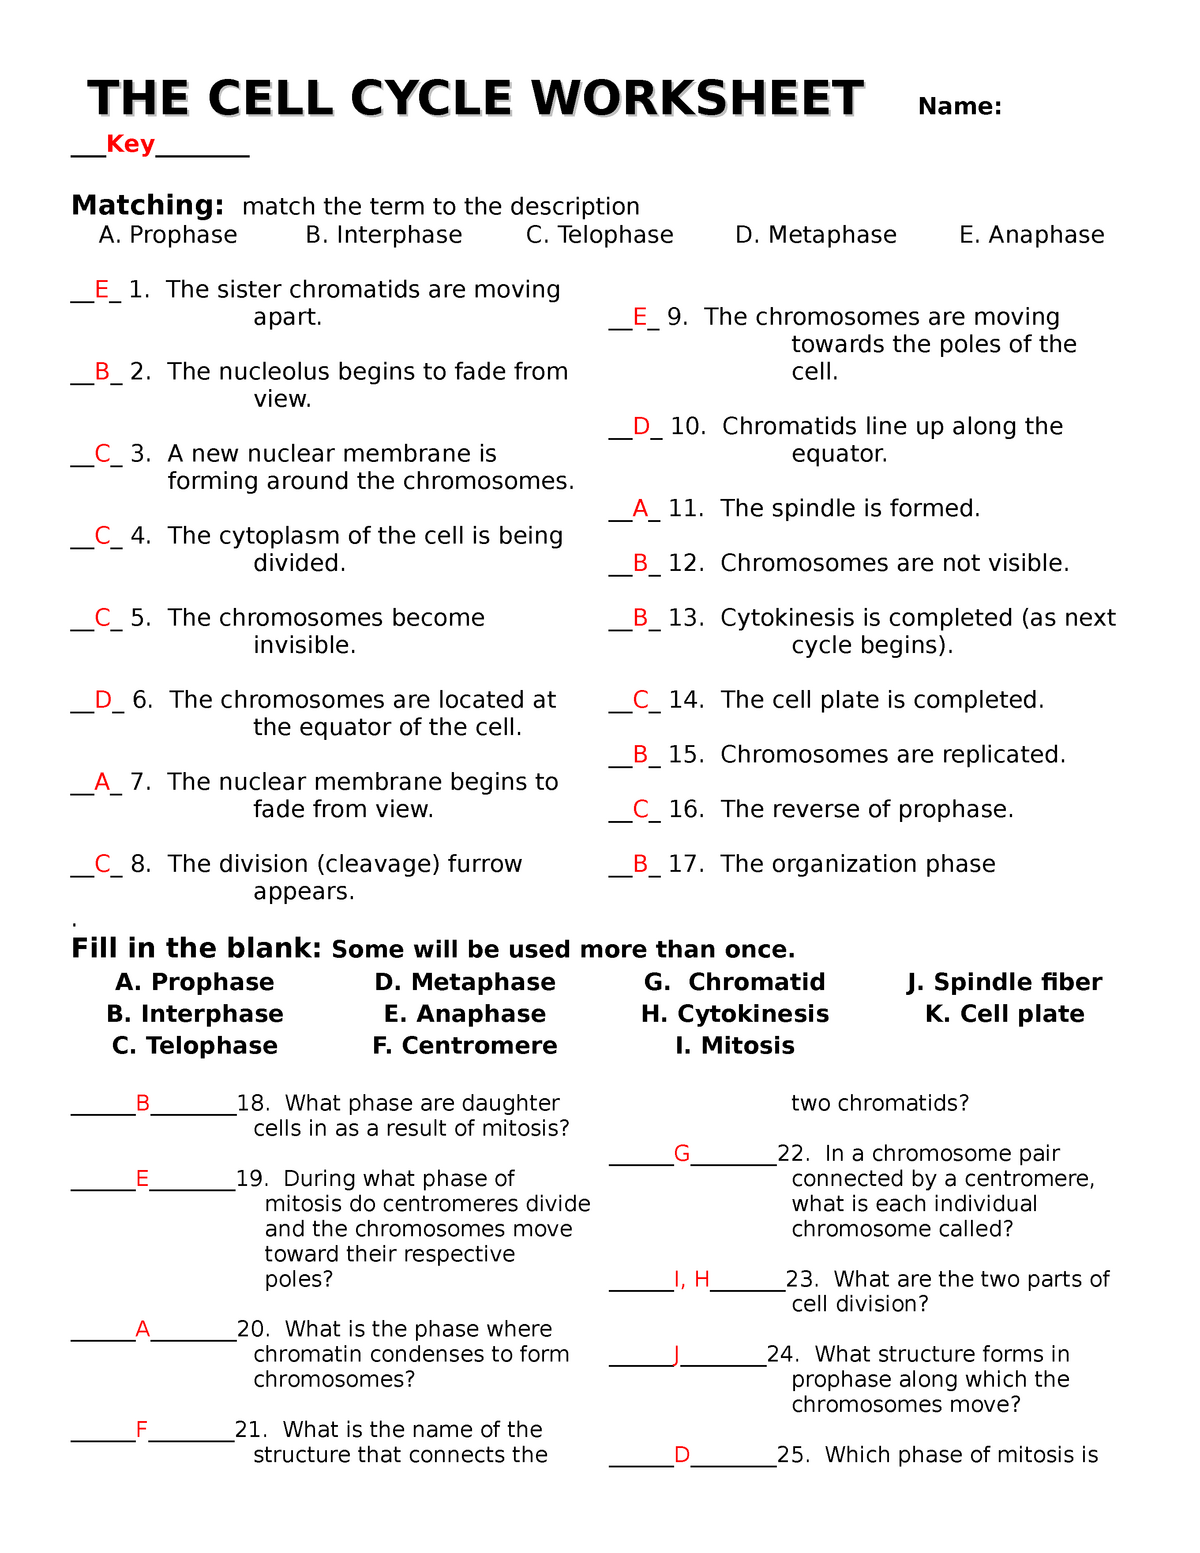 The-cell-cycle-worksheet with answers - StuDocu Throughout Cell Cycle Worksheet Answers